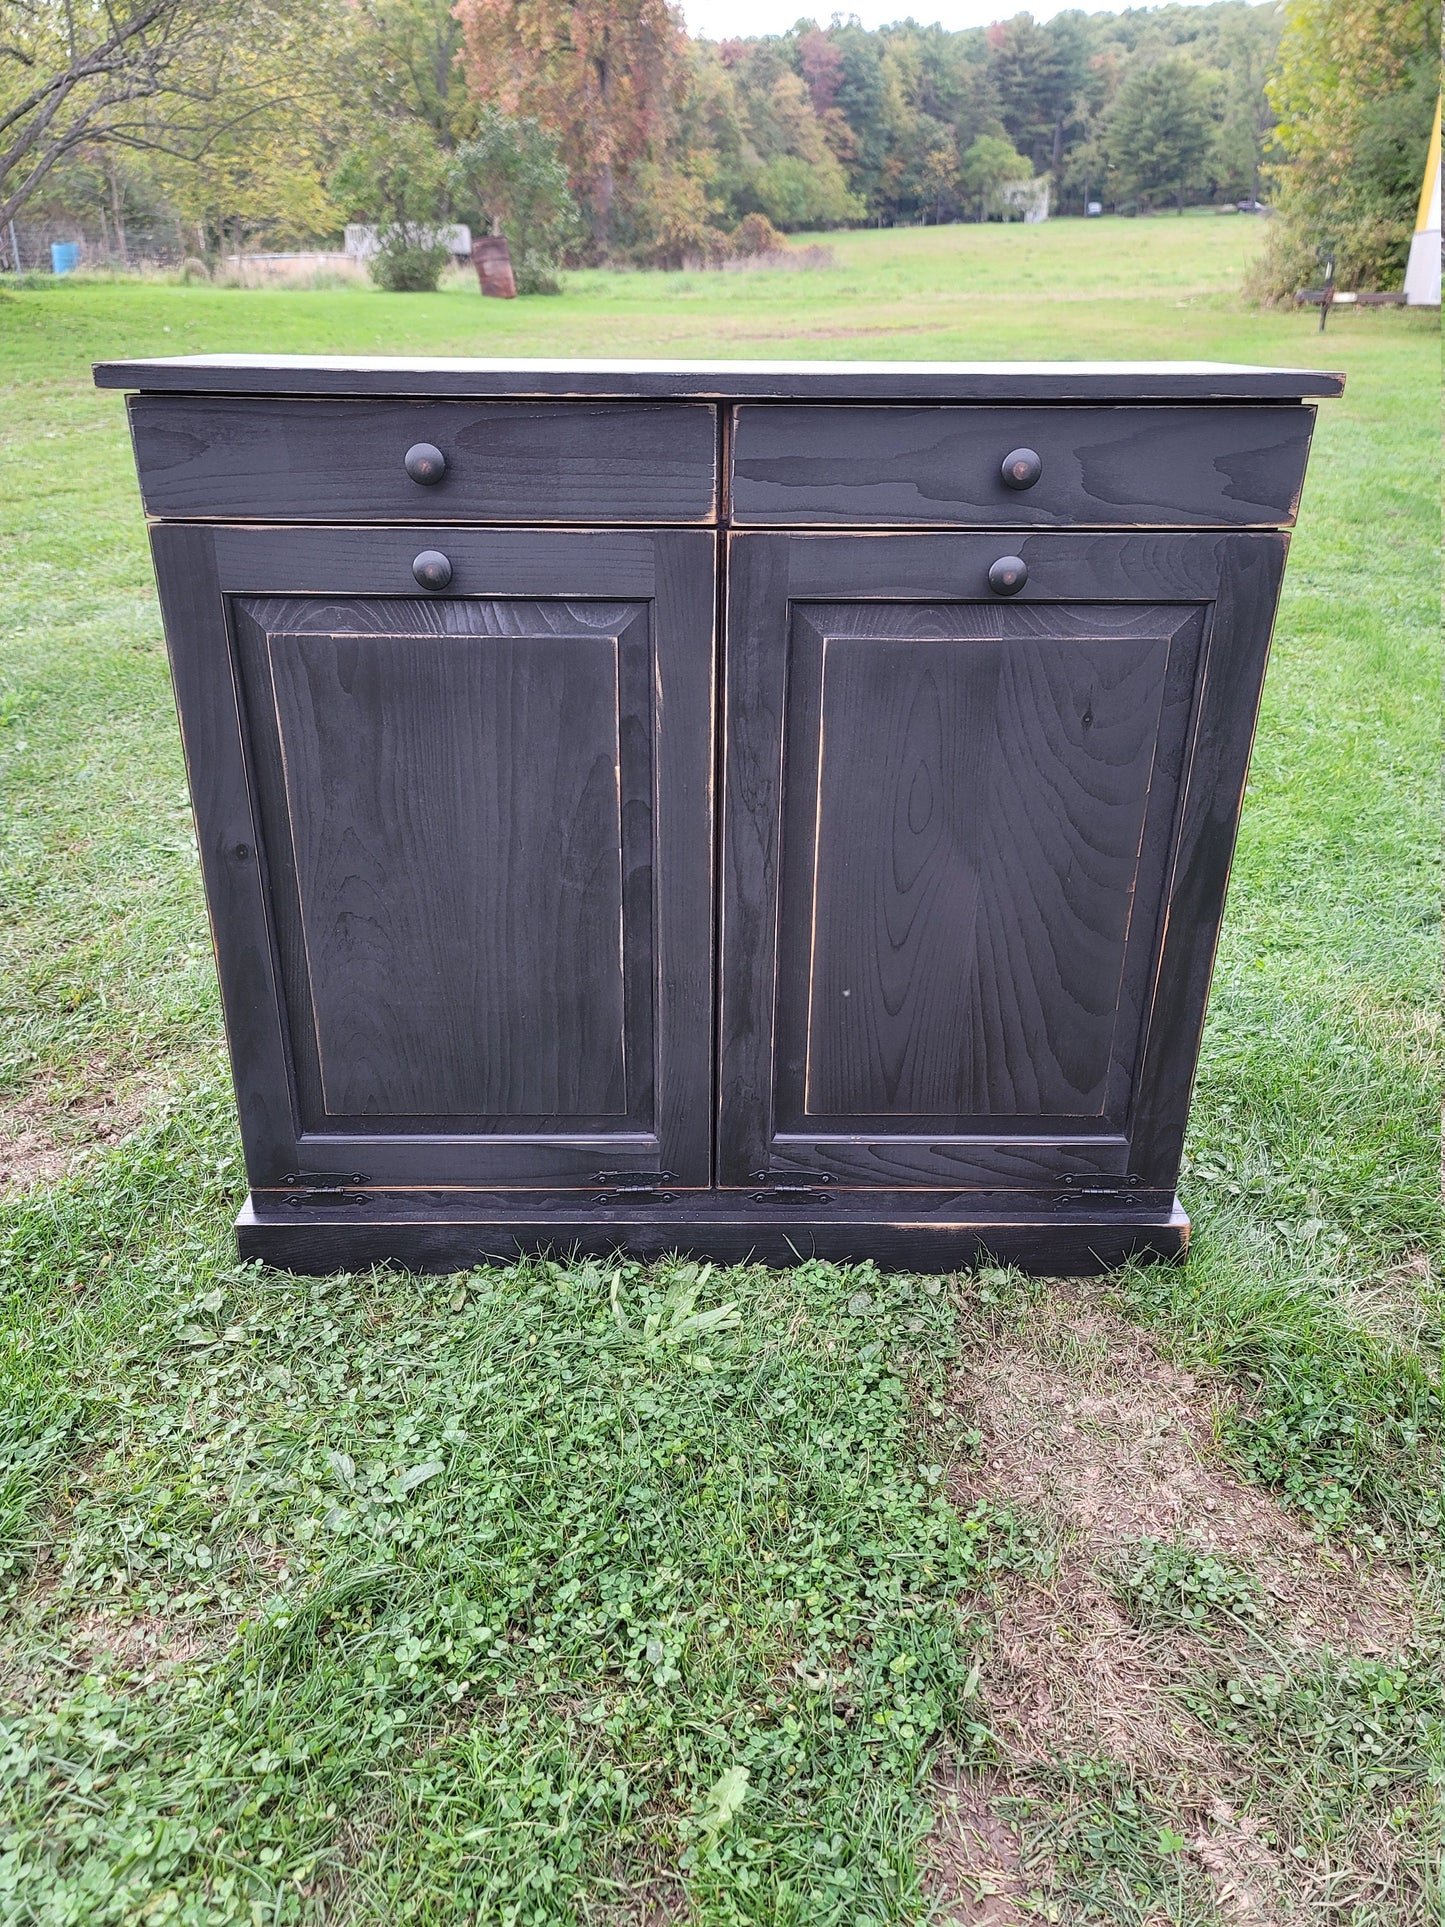 Rustic Handcrafted Double Tilt Door Trash Bin, Wooden Trash Can, Farmhouse Style Garbage Container